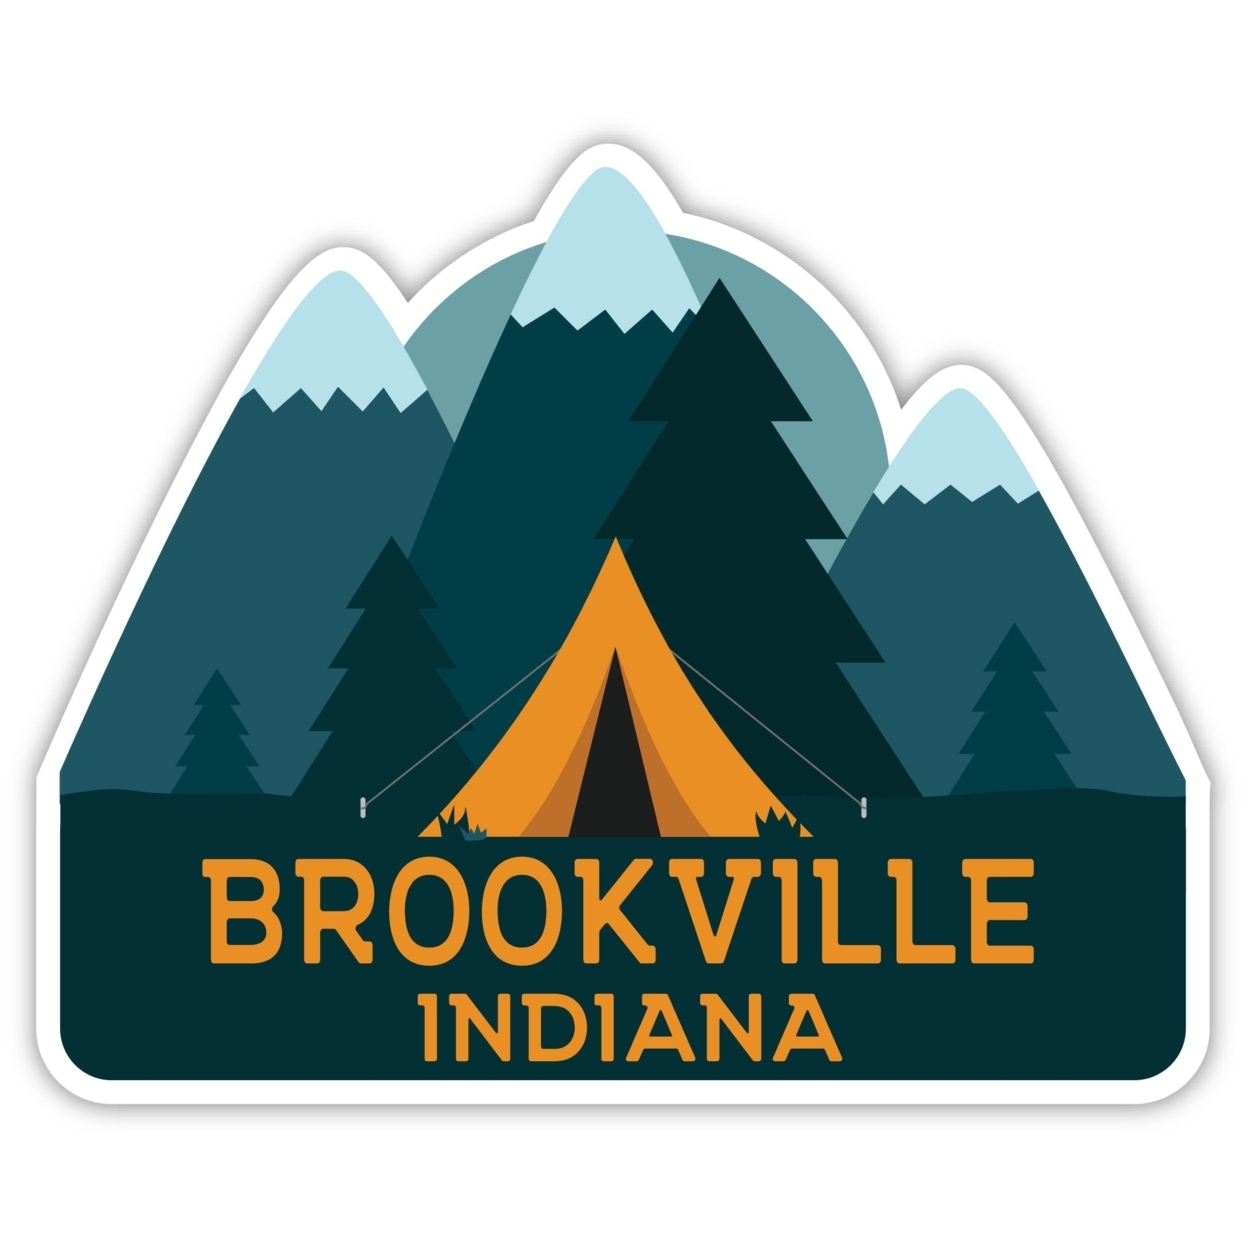 Brookville Indiana Souvenir Decorative Stickers (Choose Theme And Size) - 4-Pack, 12-Inch, Camp Life